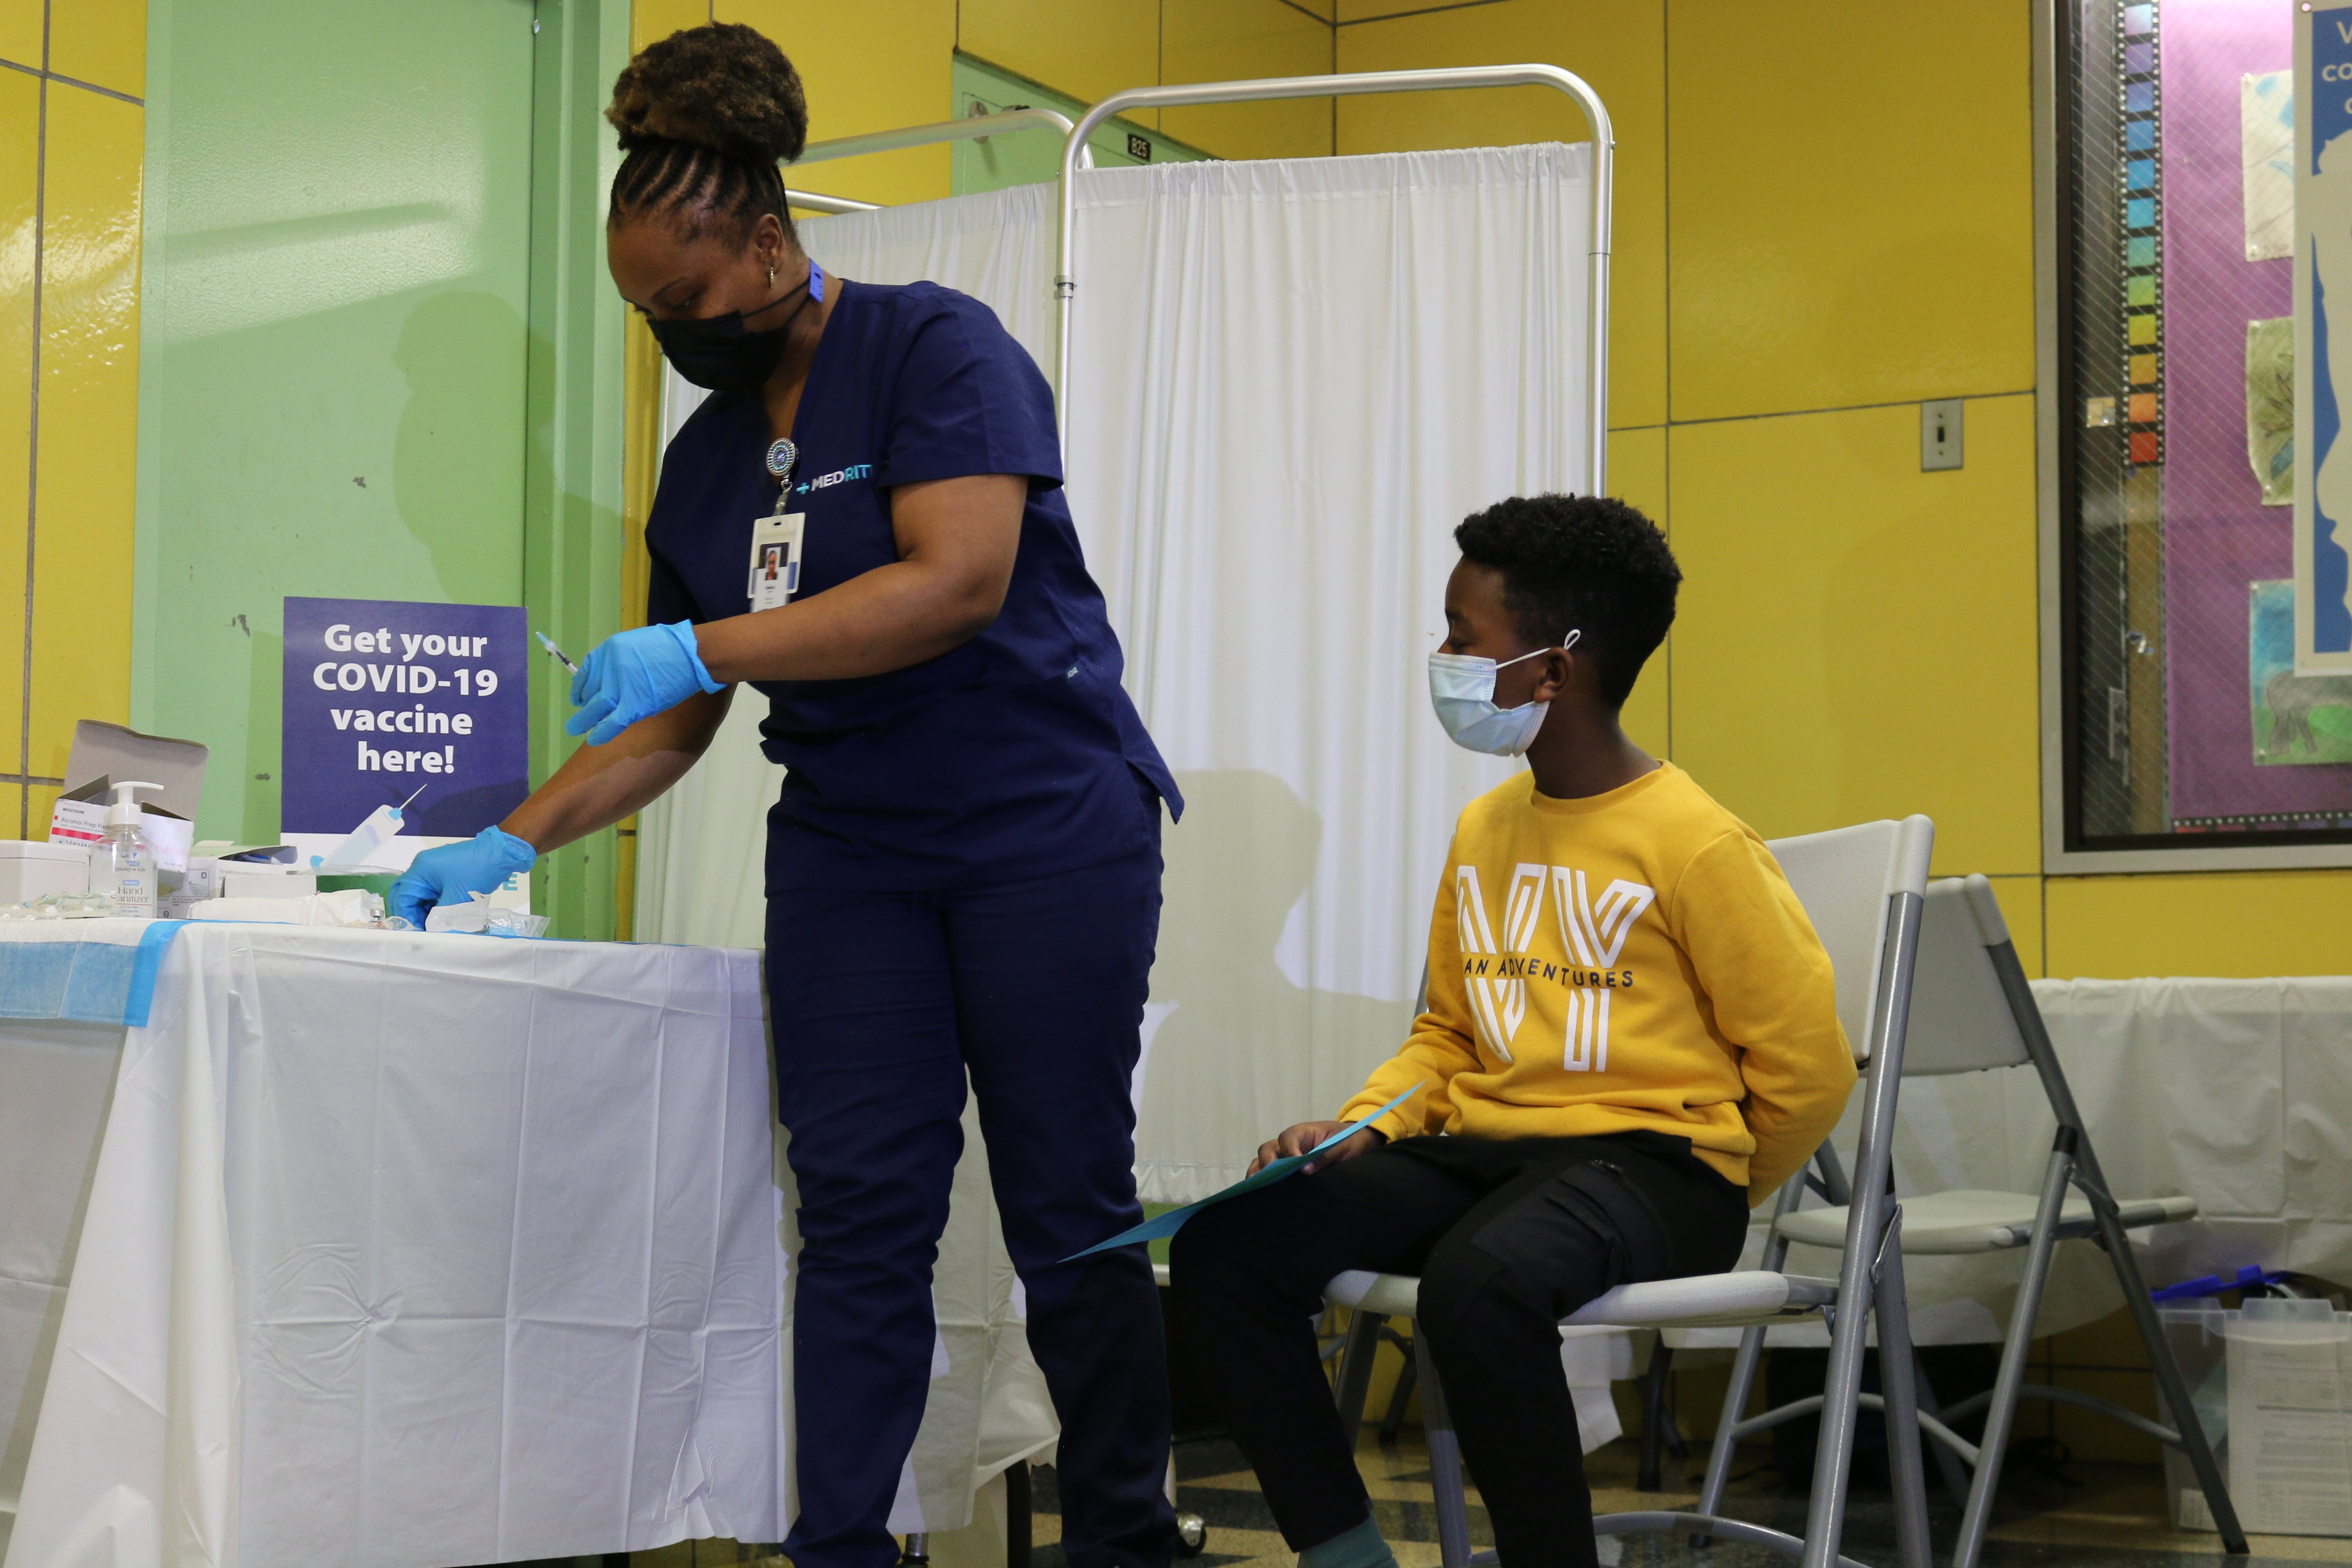 Students at P.S. 19 in Manhattan’s East Village received vaccinations in school on Nov. 8, 2021. The city has not disclosed school vaccination rates, despite a city requirement to do so.